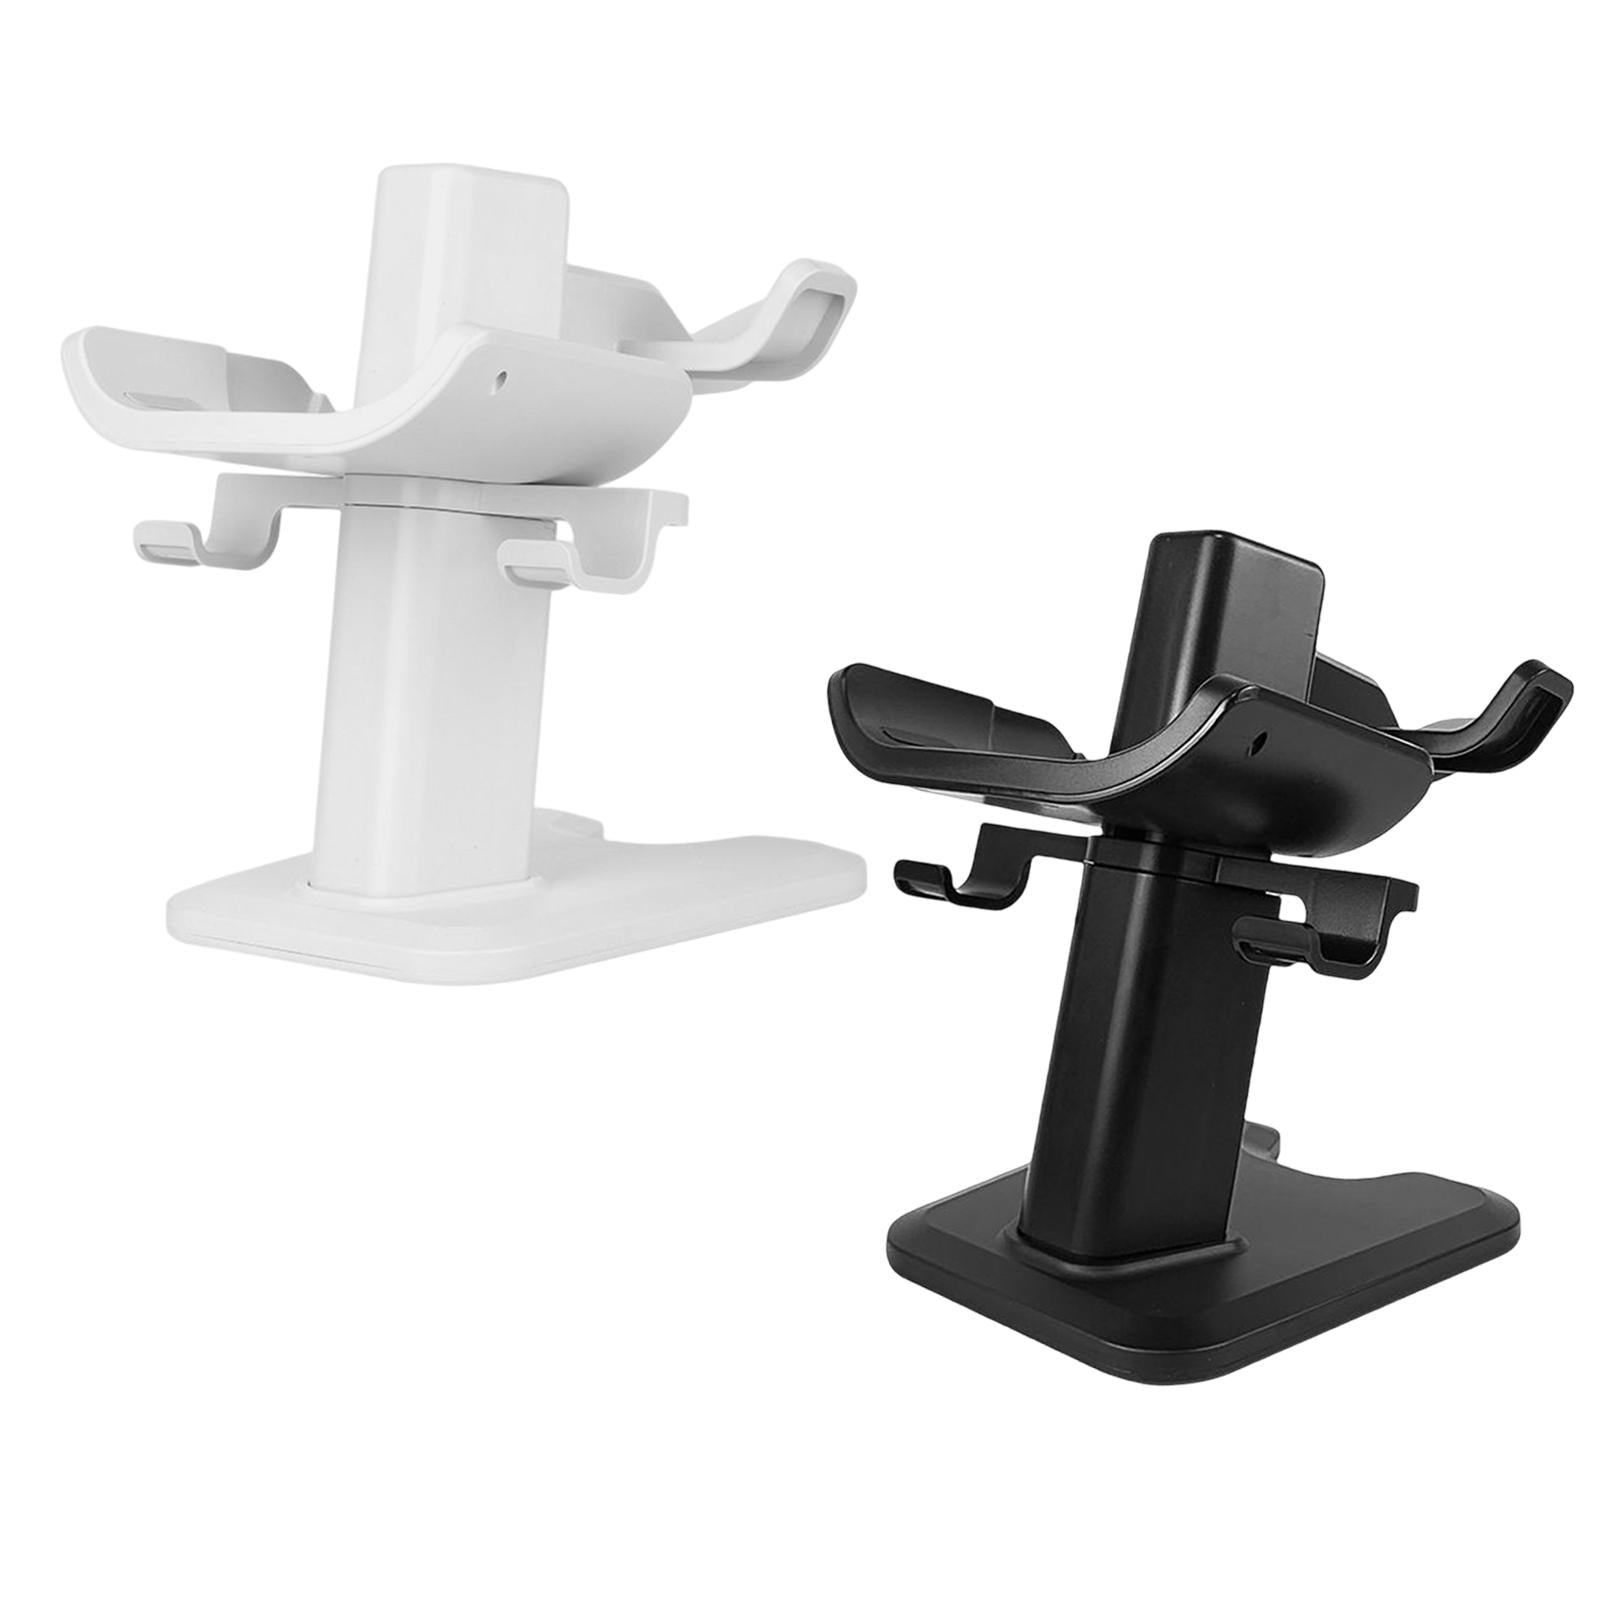 VR Stand Protection Controller Mount Station Storage Stand Stable for Quest2 White